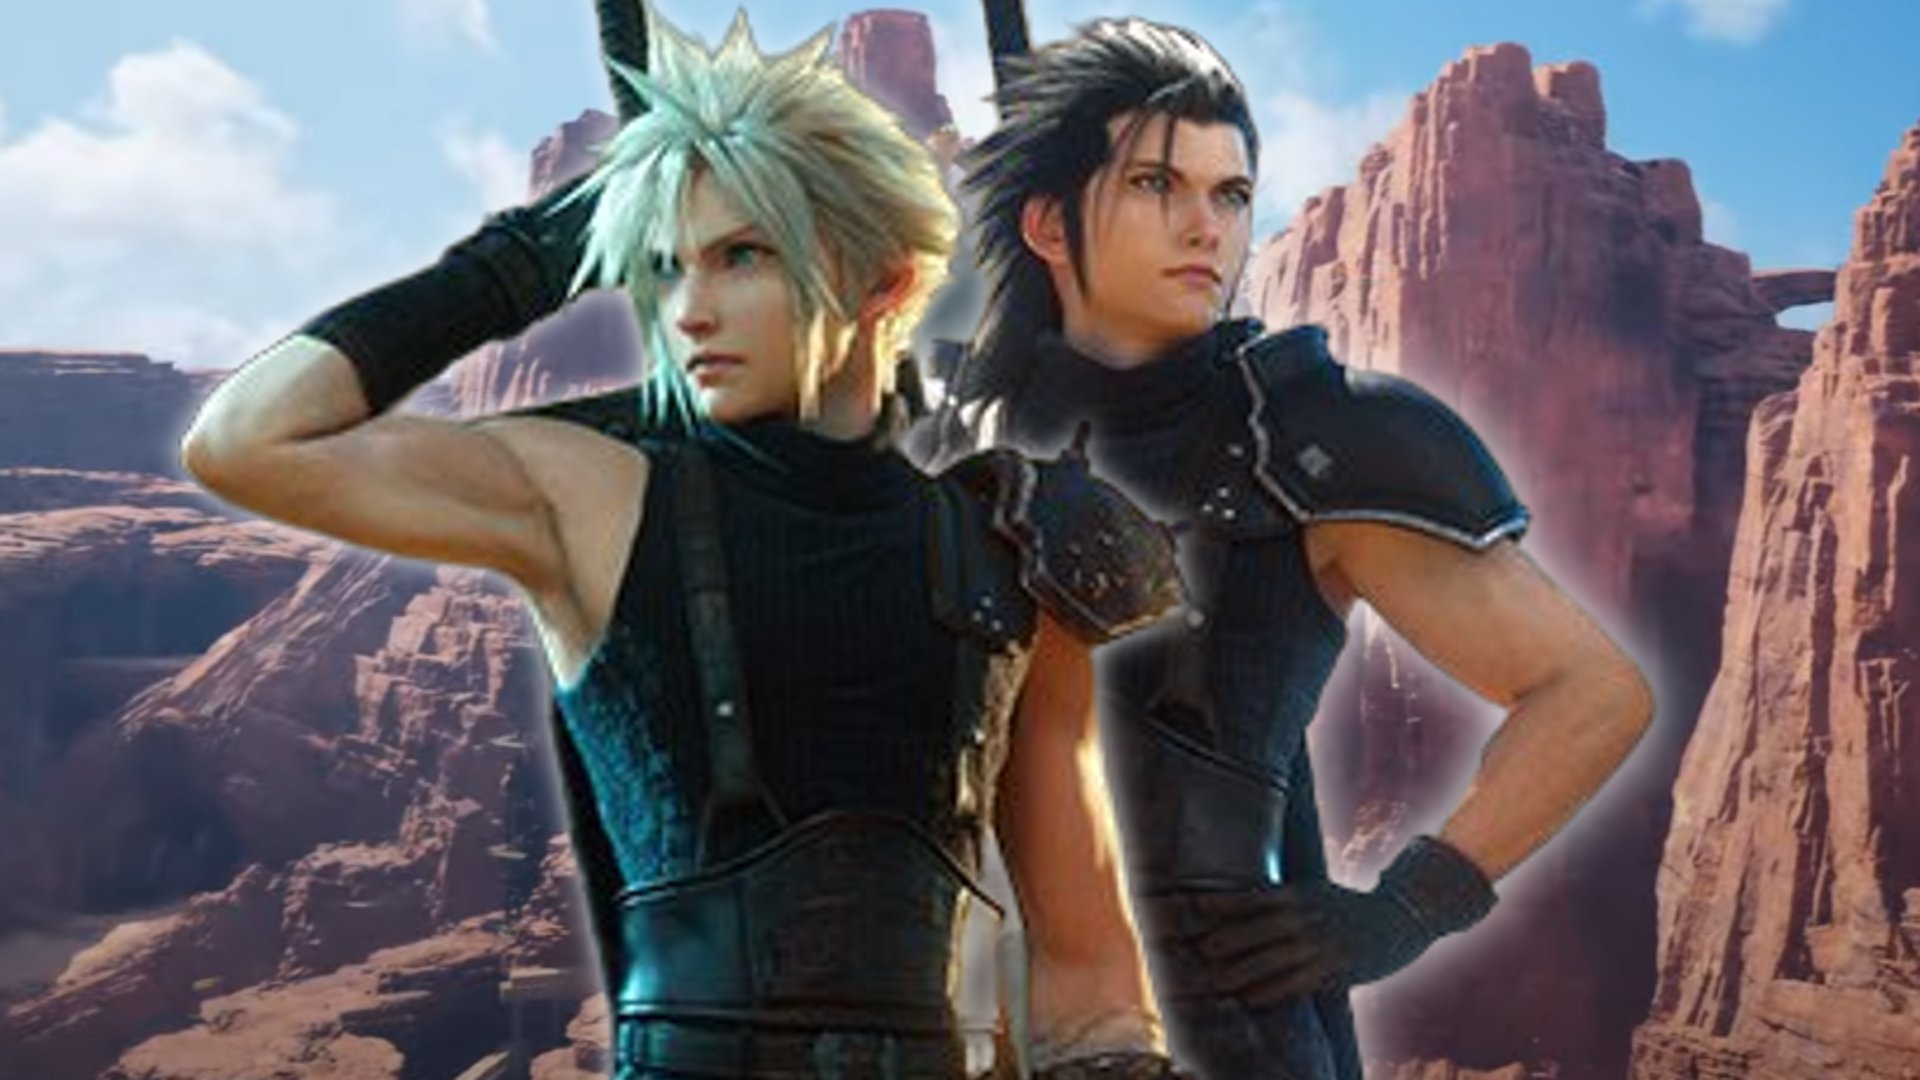 How Long FFVII Rebirth Takes to Beat, According to Square Enix